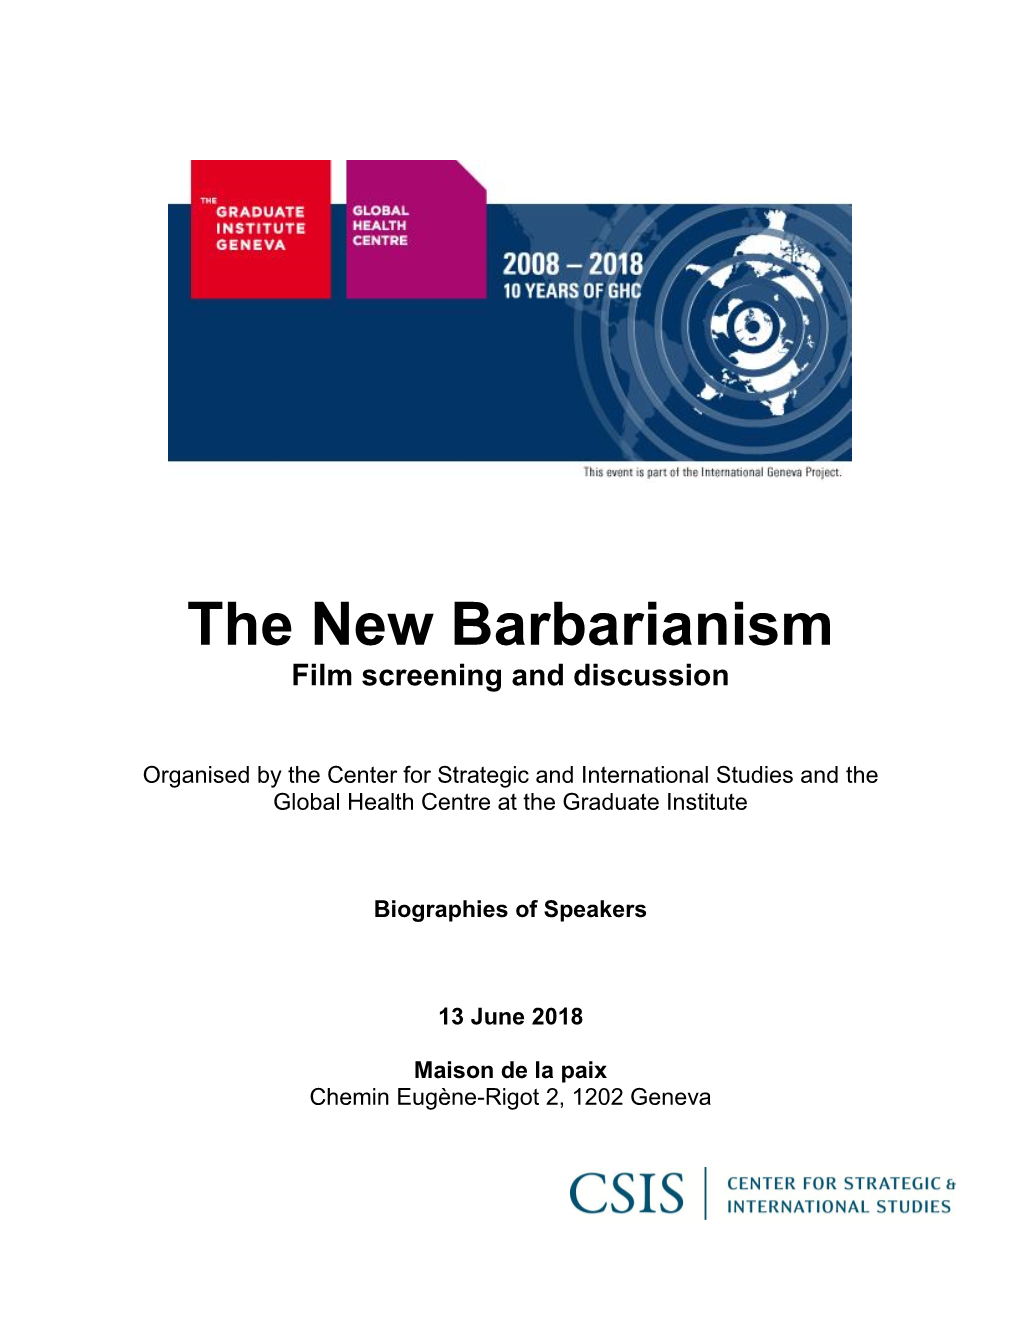 The New Barbarianism Film Screening and Discussion